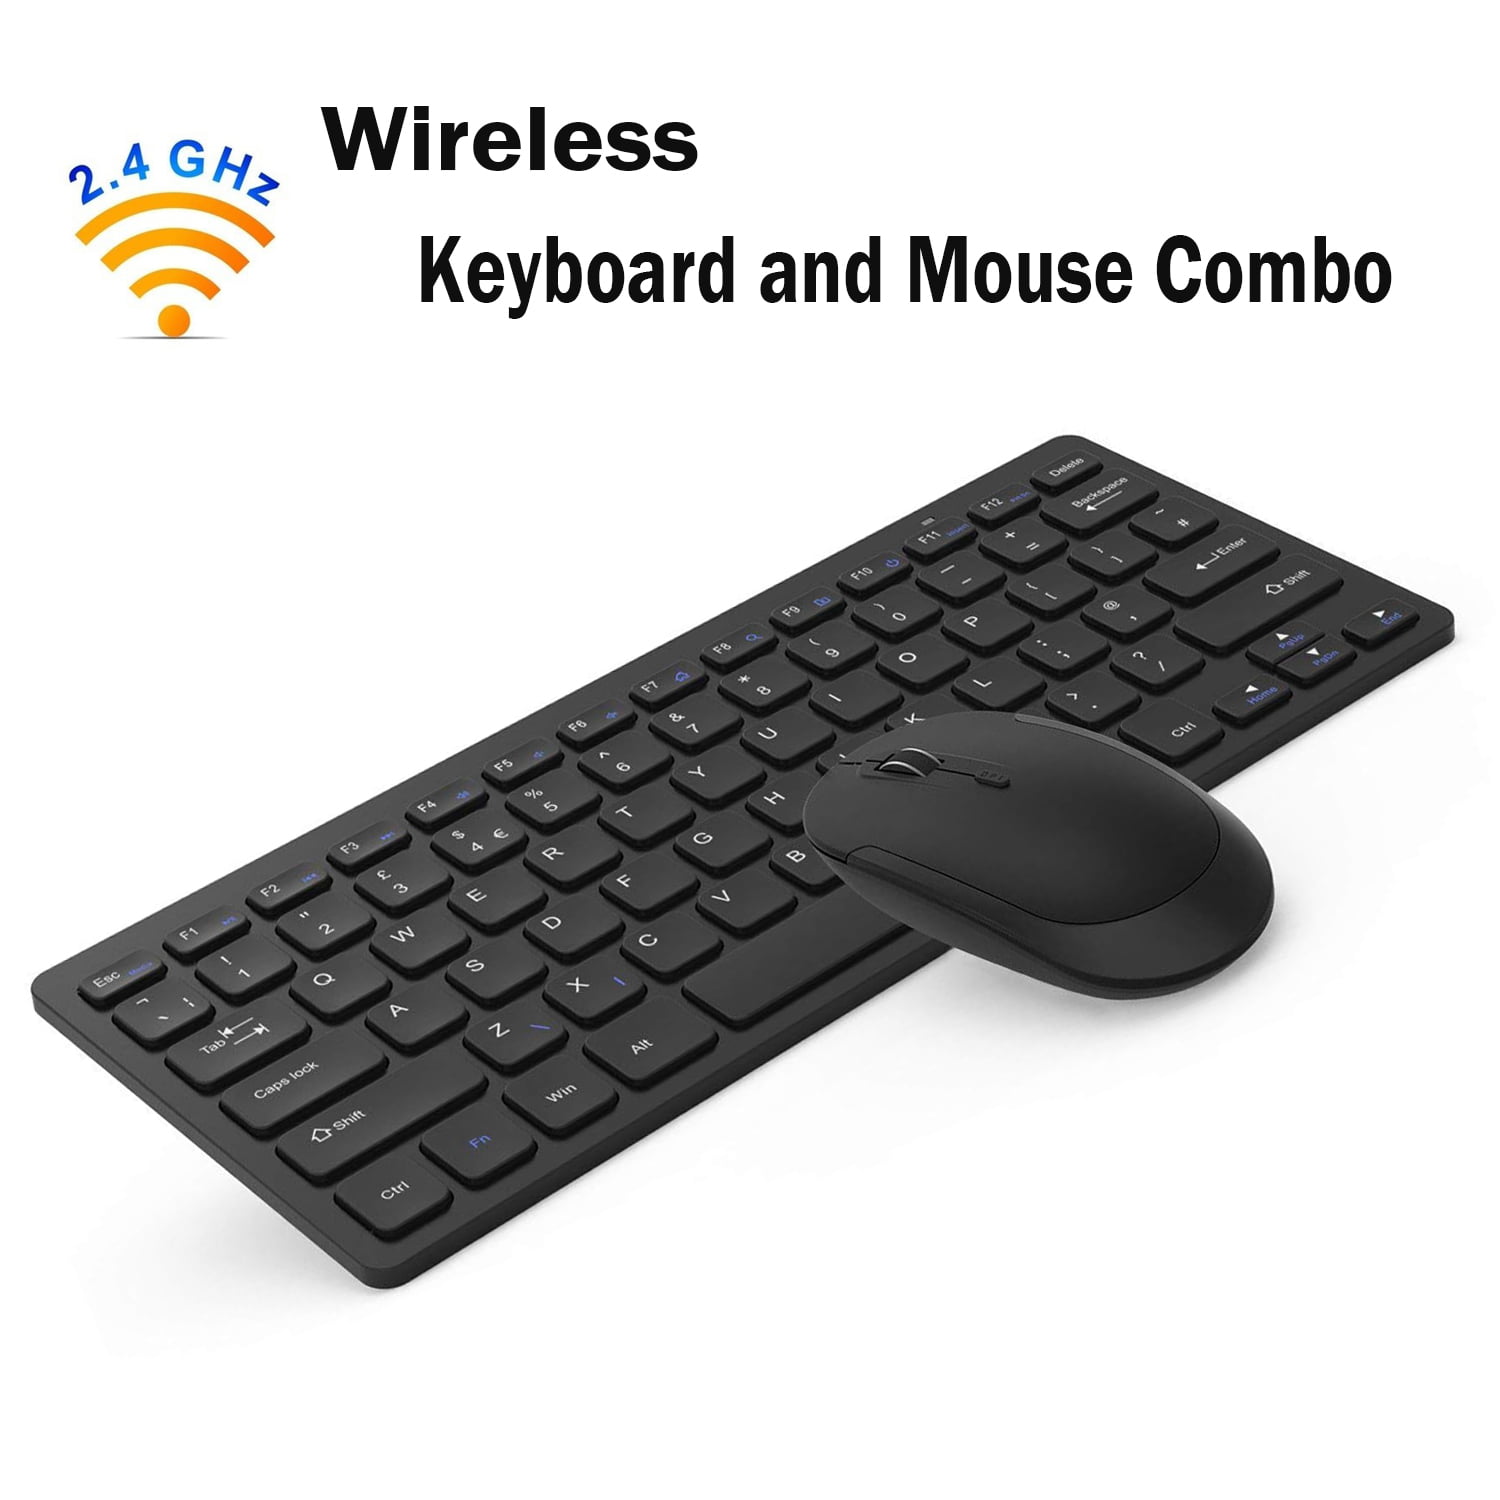 Jelly Comb Wireless USB Keyboard and Mouse Combo 2.4G Wireless Rechargeable Keyboard and Mice QWERTY UK Layout with USB Receiver for PC/Laptop/Computer with Windows System Space Gray